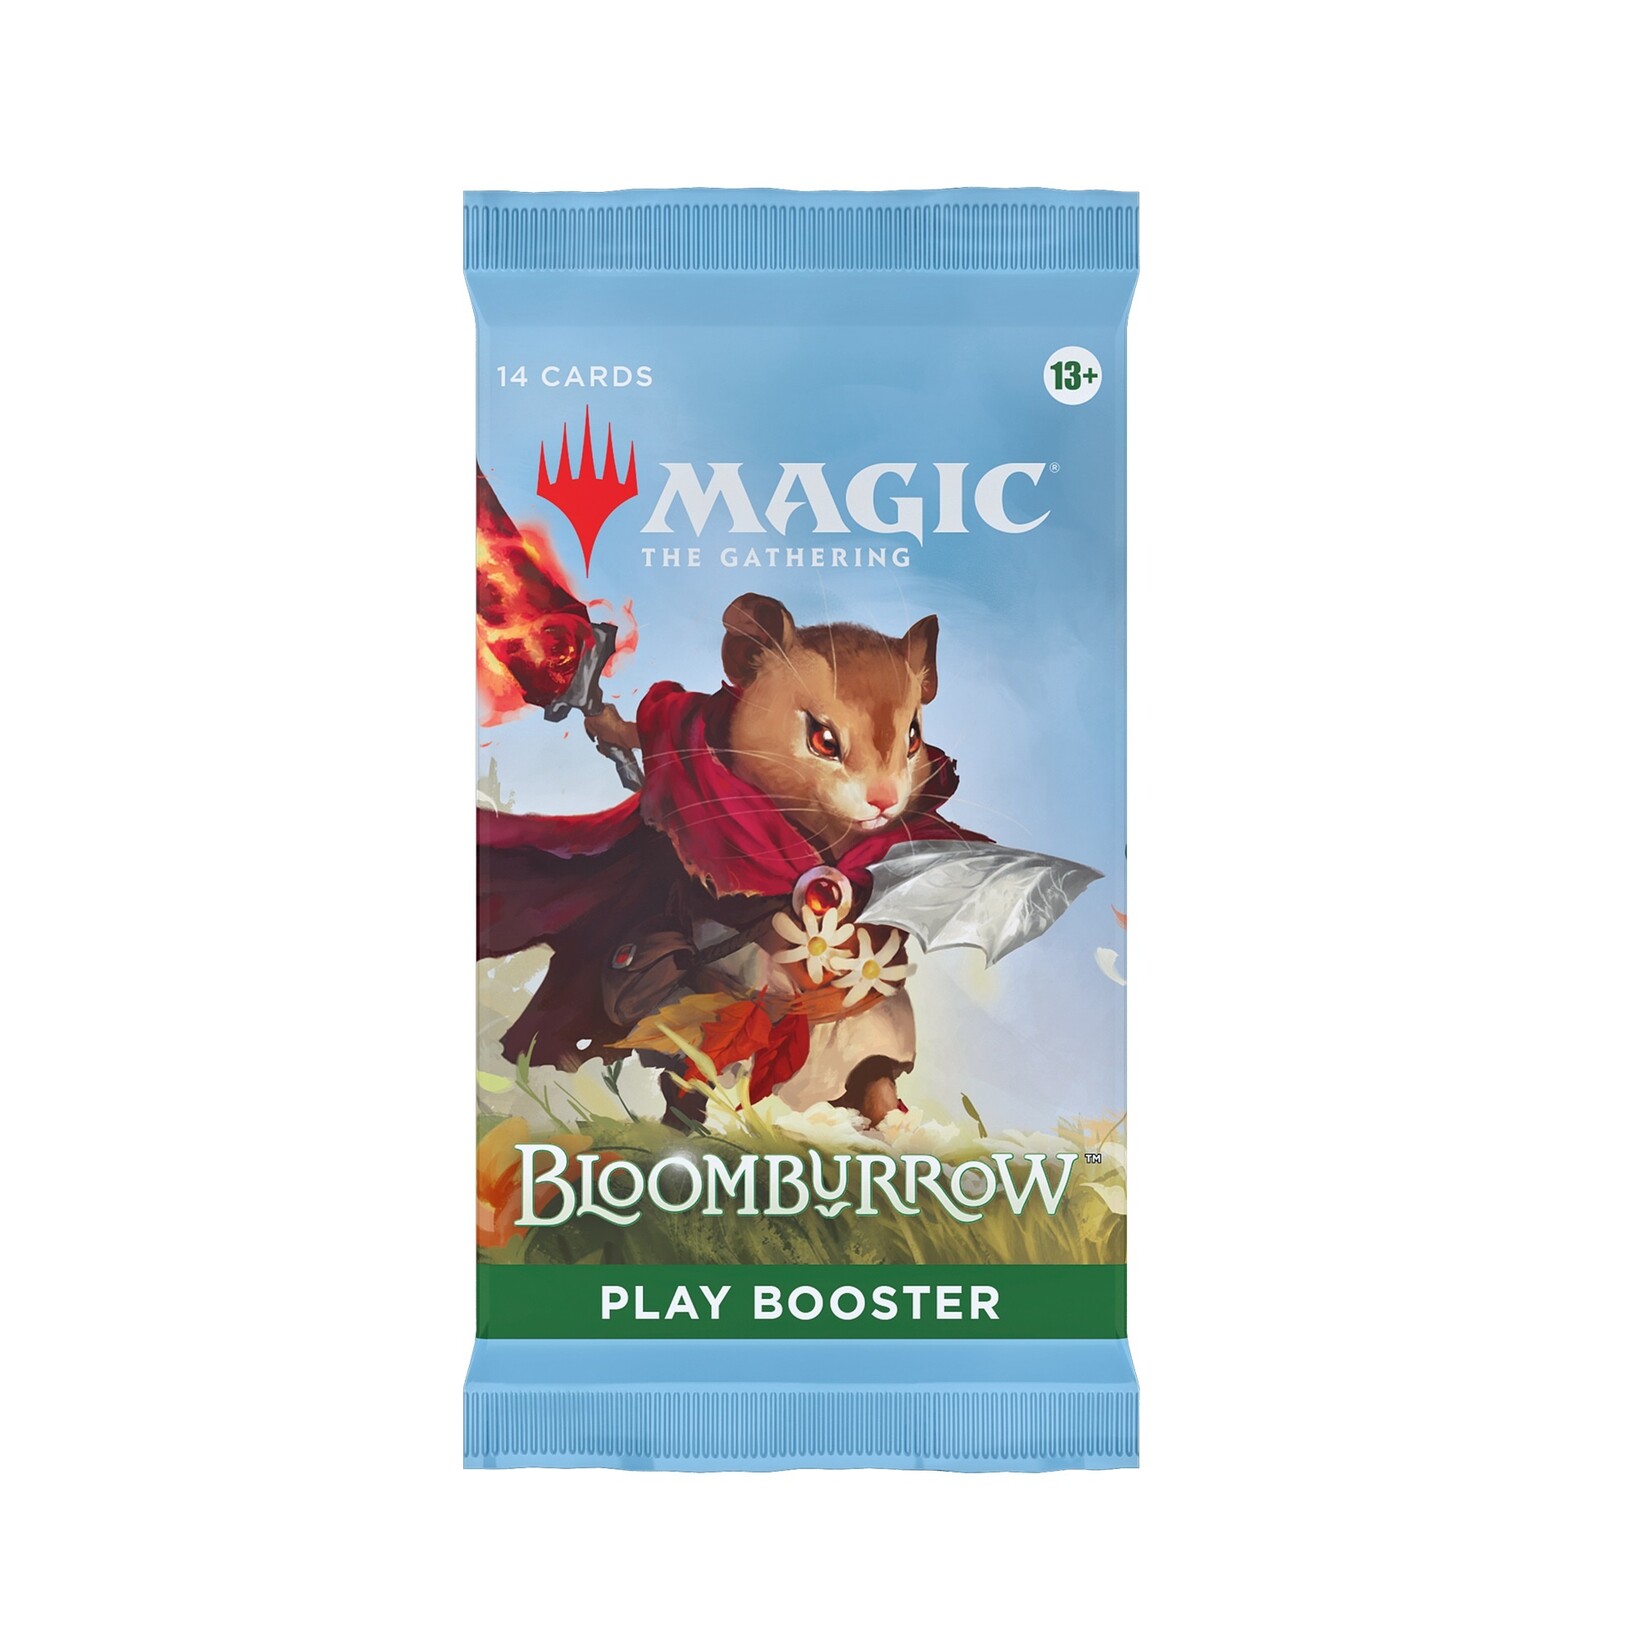 Wizard of the coast PRÉCOMMANDE - Magic The Gathering - Bloomburrow - Play Booster Box